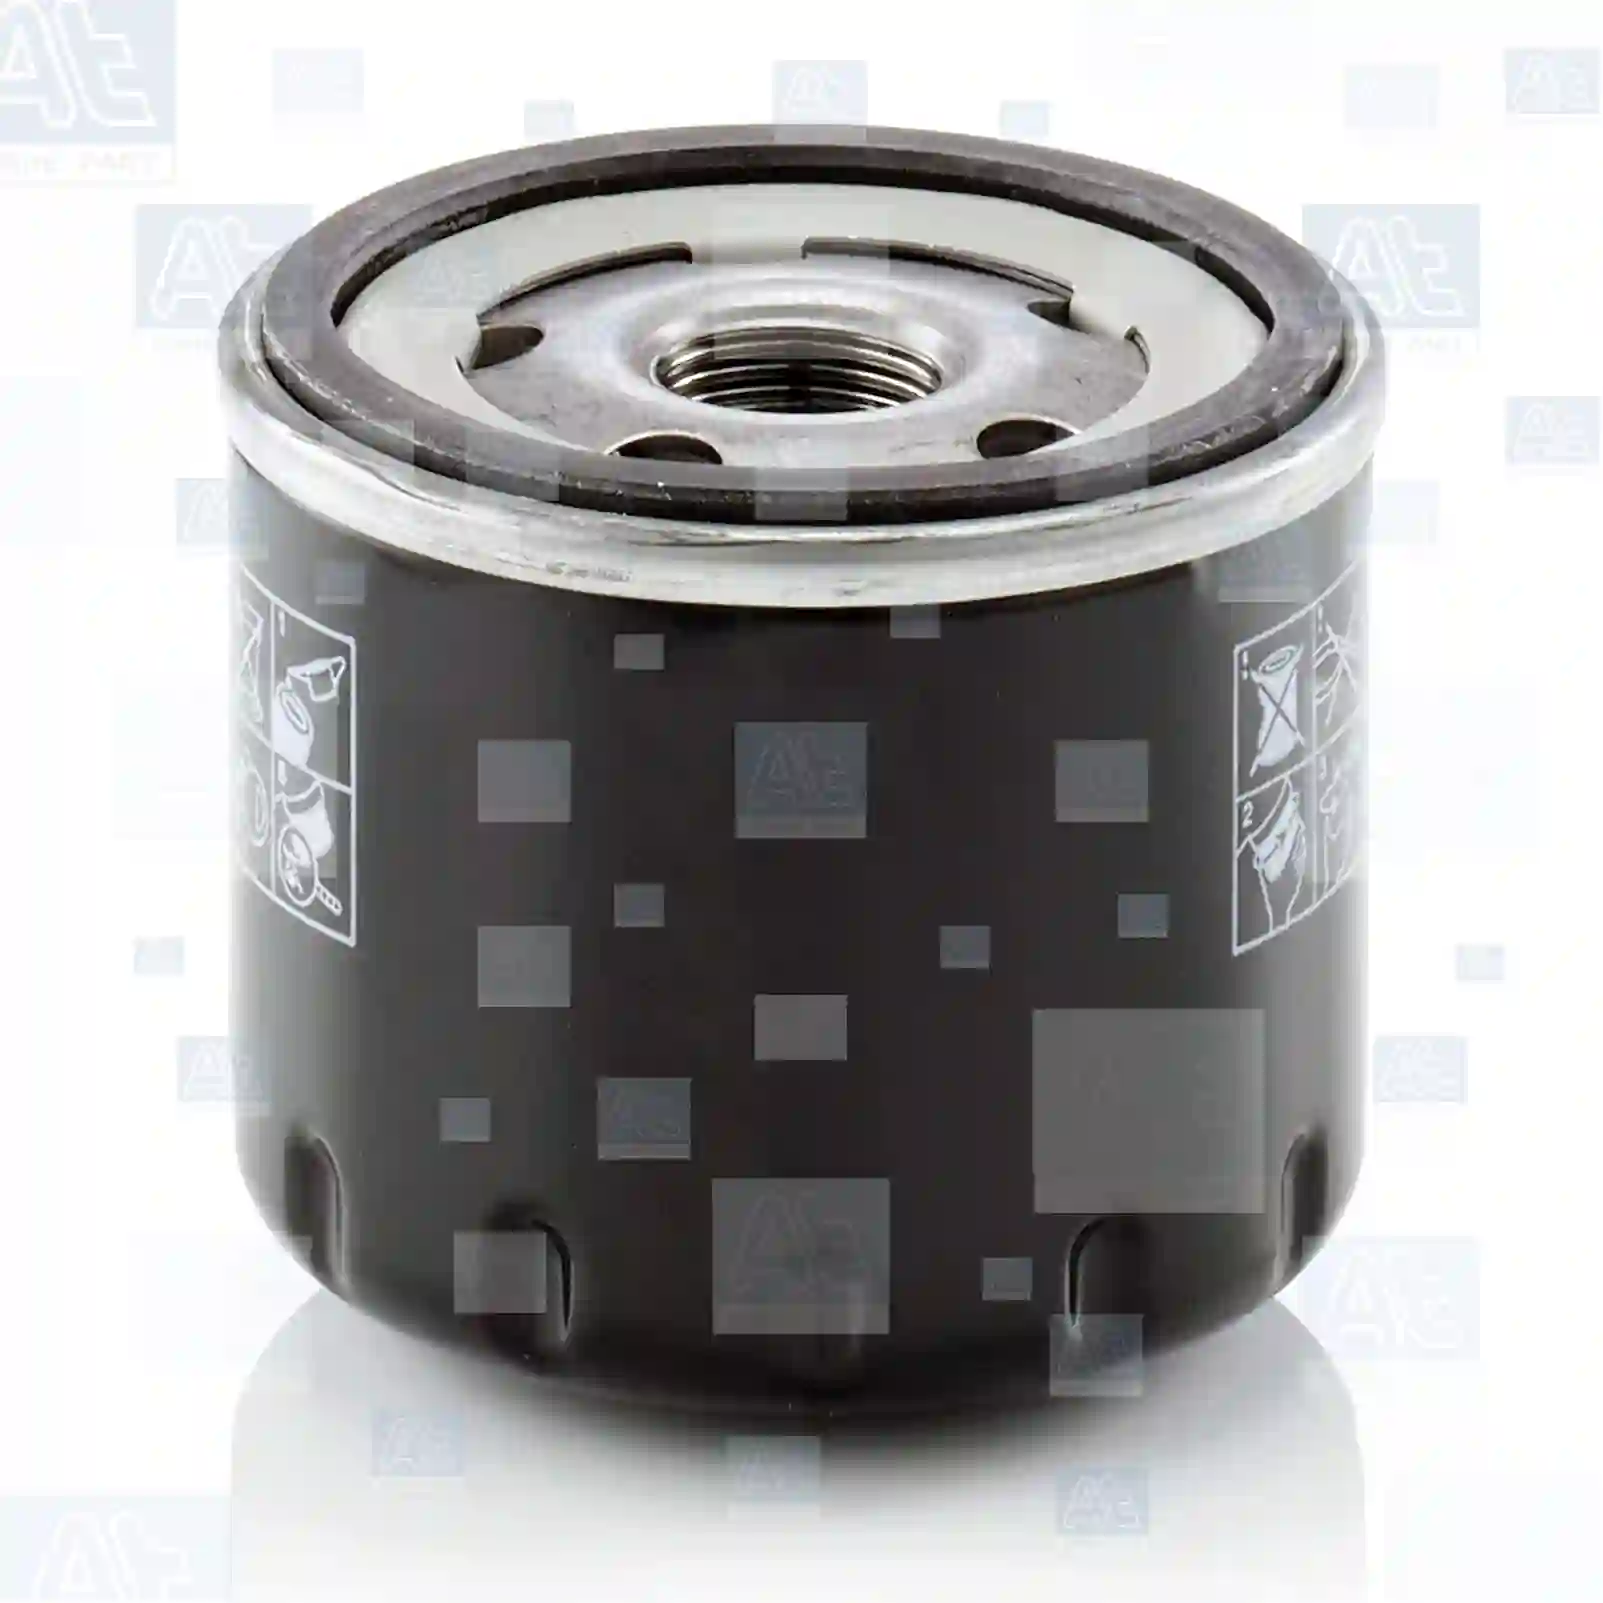 Oil filter, 77701682, 8200768927, 8200867980, 8671017369, 93181255, 93198441, 93181255, 2811800310, 15208-00Q0D, 15208-00Q0G, 15208-00QAF, 15208-AW300, 82007-68927, 4415442, 4434962, 8200768927, 8200867980, 8671017369, 2811800310, 16510-67JG0, 16510-67JG0-000, 16510-84A10, 16510-84A10-000, 16510-84A11, 16510-84A11-000, 16510-84A12, 16510-84A12-000 ||  77701682 At Spare Part | Engine, Accelerator Pedal, Camshaft, Connecting Rod, Crankcase, Crankshaft, Cylinder Head, Engine Suspension Mountings, Exhaust Manifold, Exhaust Gas Recirculation, Filter Kits, Flywheel Housing, General Overhaul Kits, Engine, Intake Manifold, Oil Cleaner, Oil Cooler, Oil Filter, Oil Pump, Oil Sump, Piston & Liner, Sensor & Switch, Timing Case, Turbocharger, Cooling System, Belt Tensioner, Coolant Filter, Coolant Pipe, Corrosion Prevention Agent, Drive, Expansion Tank, Fan, Intercooler, Monitors & Gauges, Radiator, Thermostat, V-Belt / Timing belt, Water Pump, Fuel System, Electronical Injector Unit, Feed Pump, Fuel Filter, cpl., Fuel Gauge Sender,  Fuel Line, Fuel Pump, Fuel Tank, Injection Line Kit, Injection Pump, Exhaust System, Clutch & Pedal, Gearbox, Propeller Shaft, Axles, Brake System, Hubs & Wheels, Suspension, Leaf Spring, Universal Parts / Accessories, Steering, Electrical System, Cabin Oil filter, 77701682, 8200768927, 8200867980, 8671017369, 93181255, 93198441, 93181255, 2811800310, 15208-00Q0D, 15208-00Q0G, 15208-00QAF, 15208-AW300, 82007-68927, 4415442, 4434962, 8200768927, 8200867980, 8671017369, 2811800310, 16510-67JG0, 16510-67JG0-000, 16510-84A10, 16510-84A10-000, 16510-84A11, 16510-84A11-000, 16510-84A12, 16510-84A12-000 ||  77701682 At Spare Part | Engine, Accelerator Pedal, Camshaft, Connecting Rod, Crankcase, Crankshaft, Cylinder Head, Engine Suspension Mountings, Exhaust Manifold, Exhaust Gas Recirculation, Filter Kits, Flywheel Housing, General Overhaul Kits, Engine, Intake Manifold, Oil Cleaner, Oil Cooler, Oil Filter, Oil Pump, Oil Sump, Piston & Liner, Sensor & Switch, Timing Case, Turbocharger, Cooling System, Belt Tensioner, Coolant Filter, Coolant Pipe, Corrosion Prevention Agent, Drive, Expansion Tank, Fan, Intercooler, Monitors & Gauges, Radiator, Thermostat, V-Belt / Timing belt, Water Pump, Fuel System, Electronical Injector Unit, Feed Pump, Fuel Filter, cpl., Fuel Gauge Sender,  Fuel Line, Fuel Pump, Fuel Tank, Injection Line Kit, Injection Pump, Exhaust System, Clutch & Pedal, Gearbox, Propeller Shaft, Axles, Brake System, Hubs & Wheels, Suspension, Leaf Spring, Universal Parts / Accessories, Steering, Electrical System, Cabin